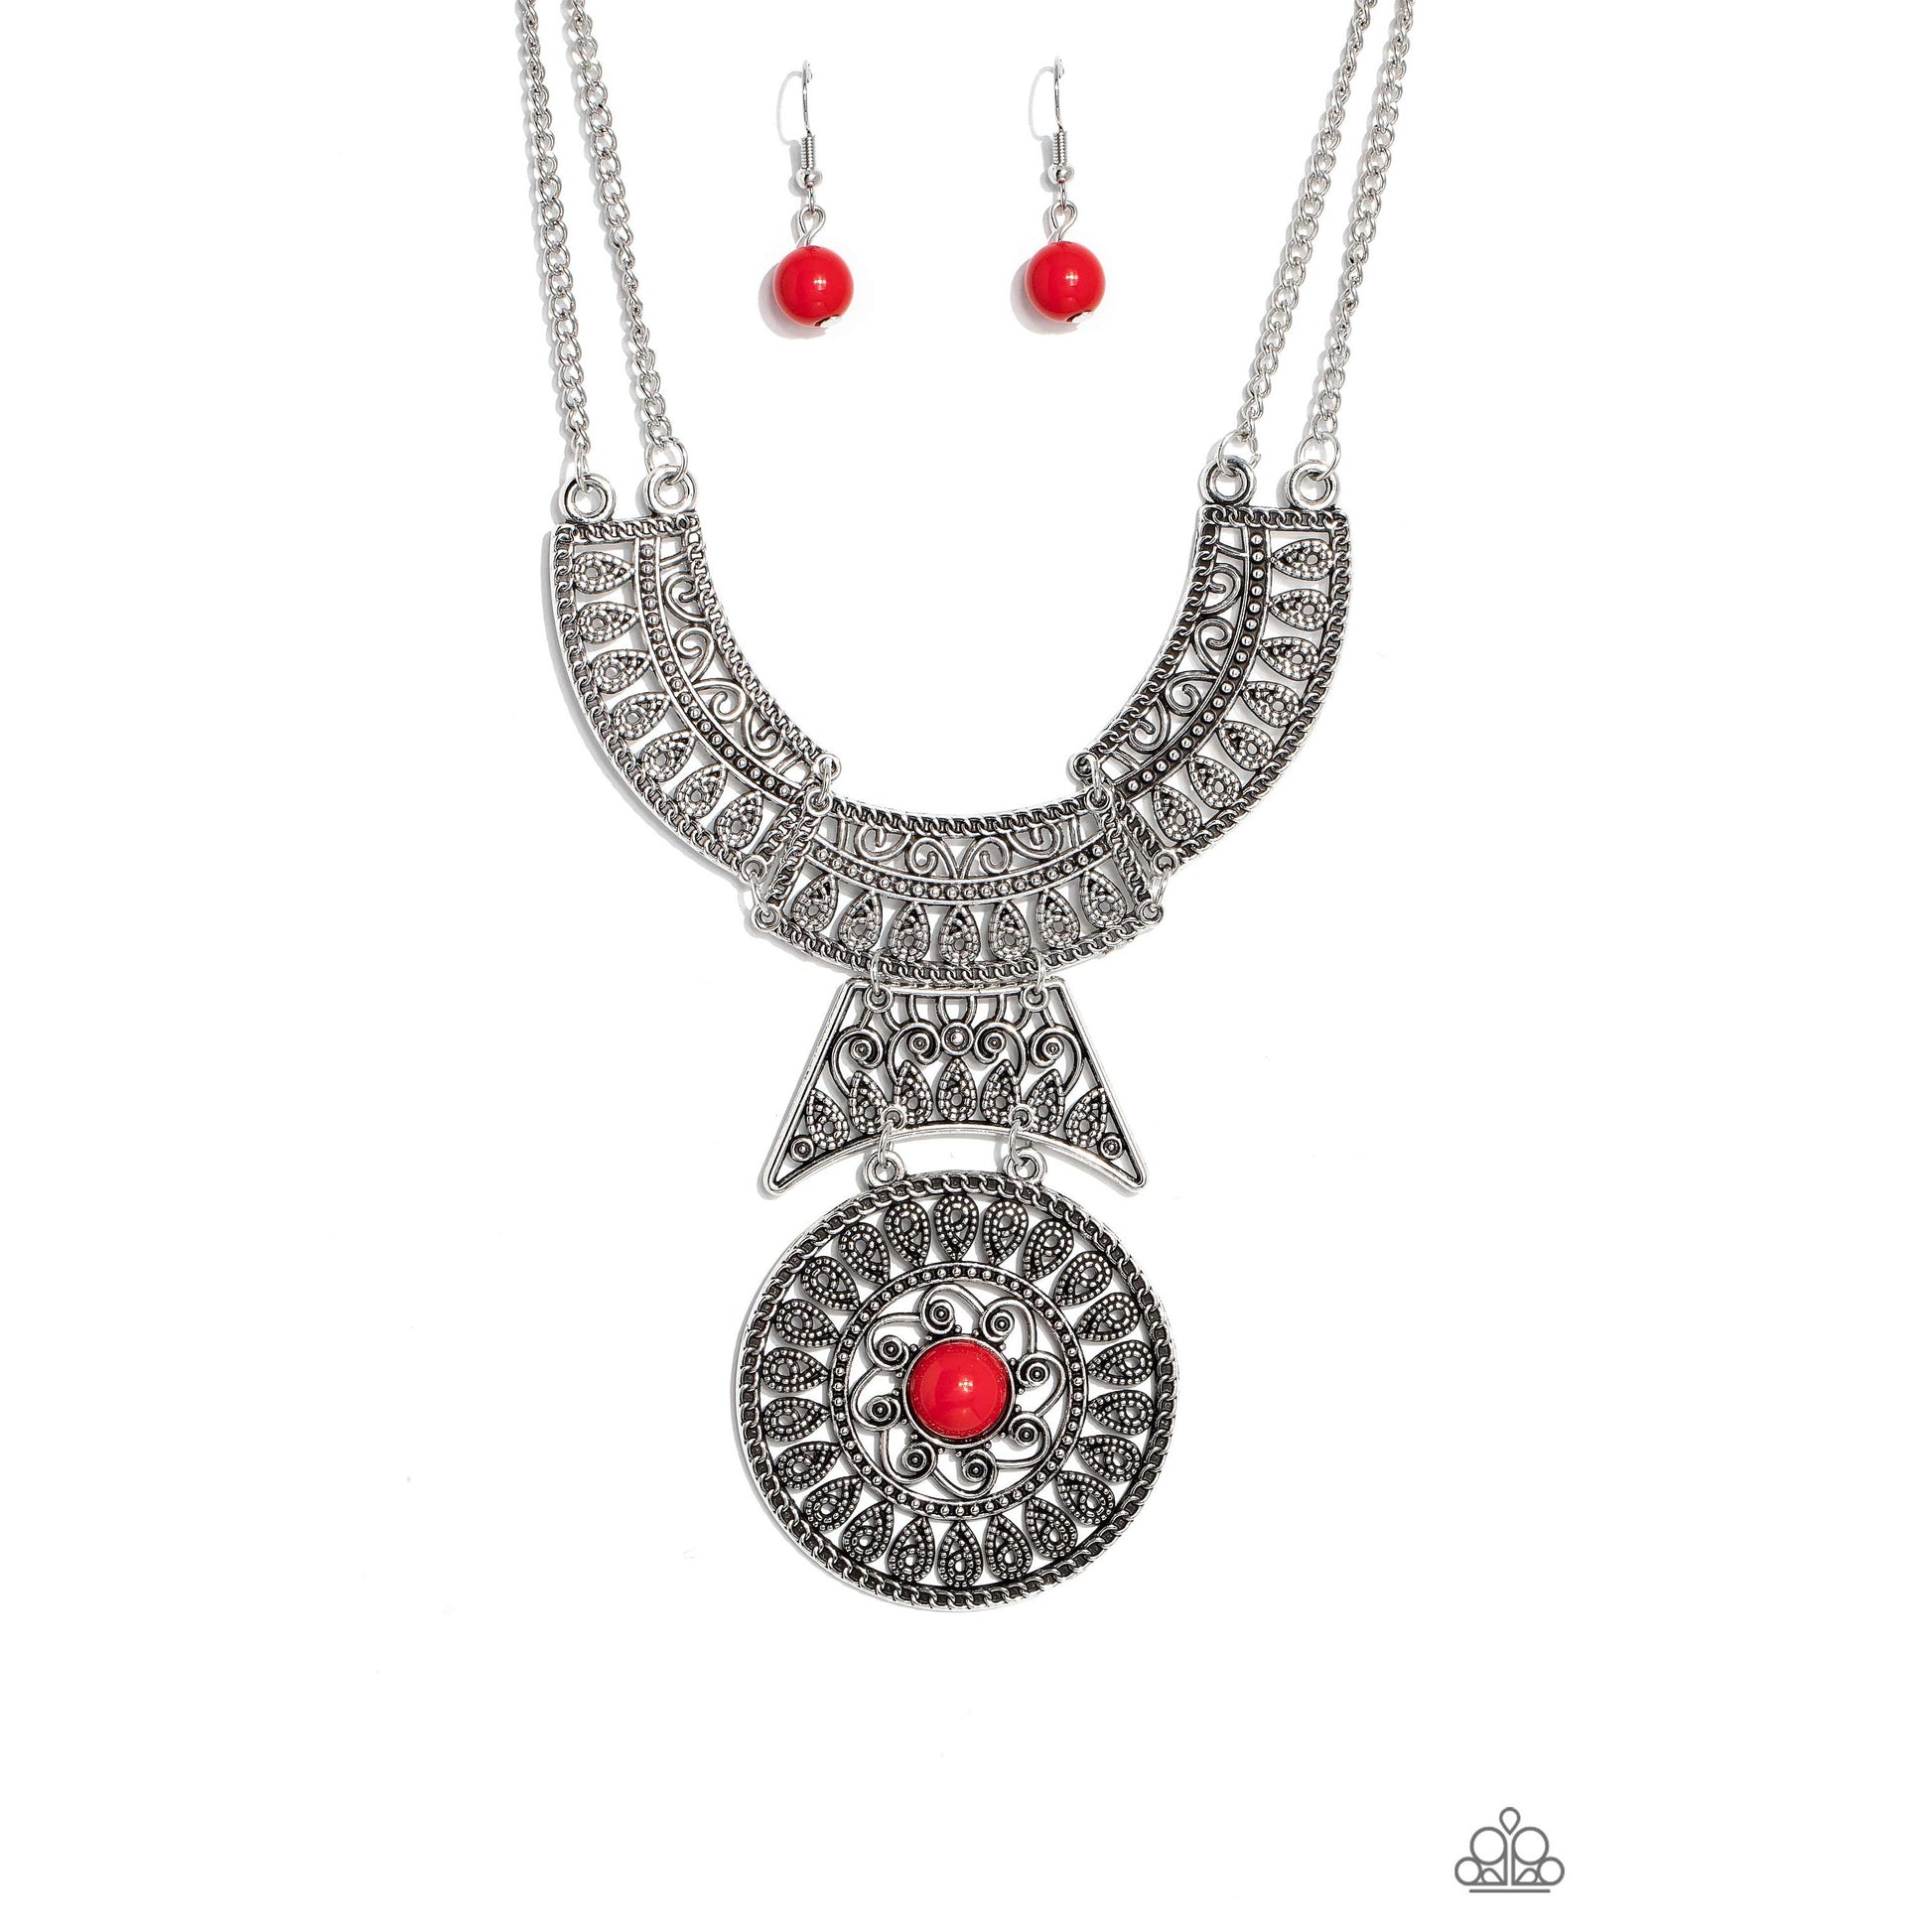 Fetching Filigree - Red Filigree Necklace - Bling by Danielle Baker